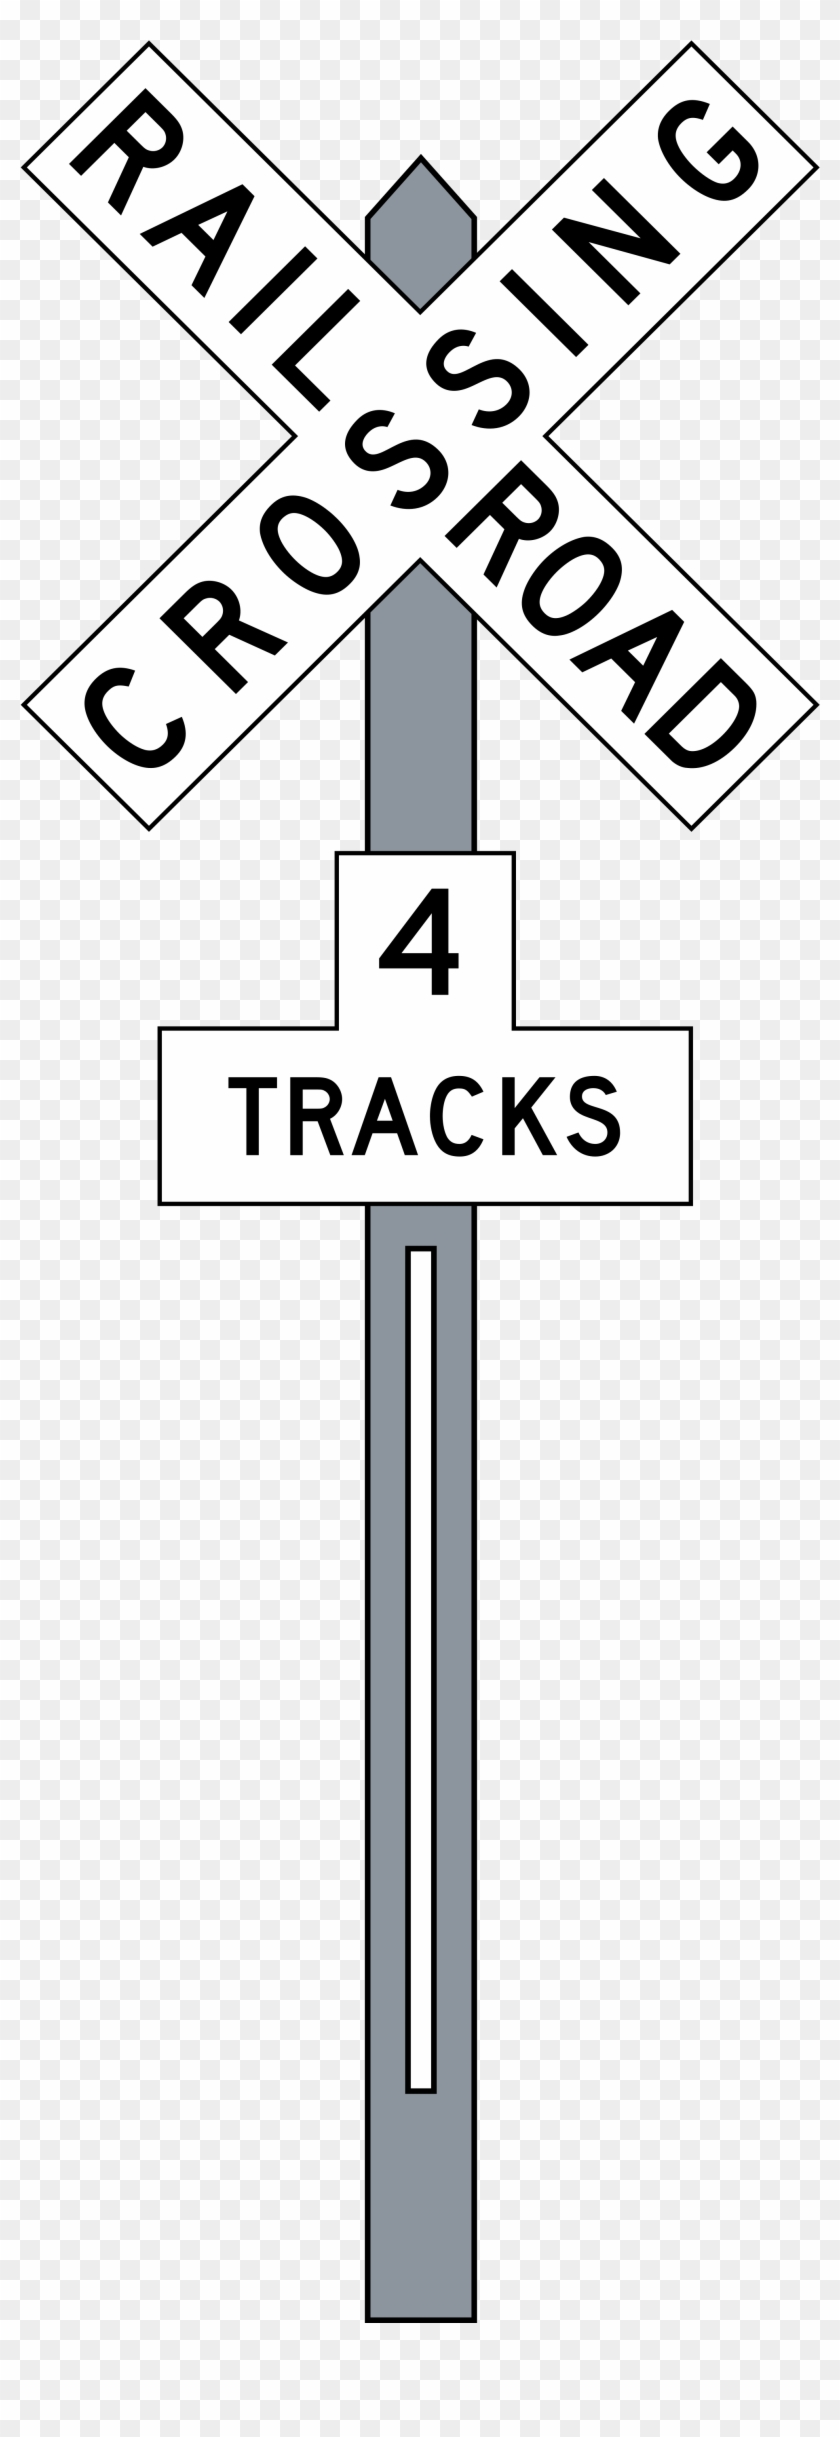 Png Image Information - Railroad Crossing 4 Tracks Sign Clipart #809697